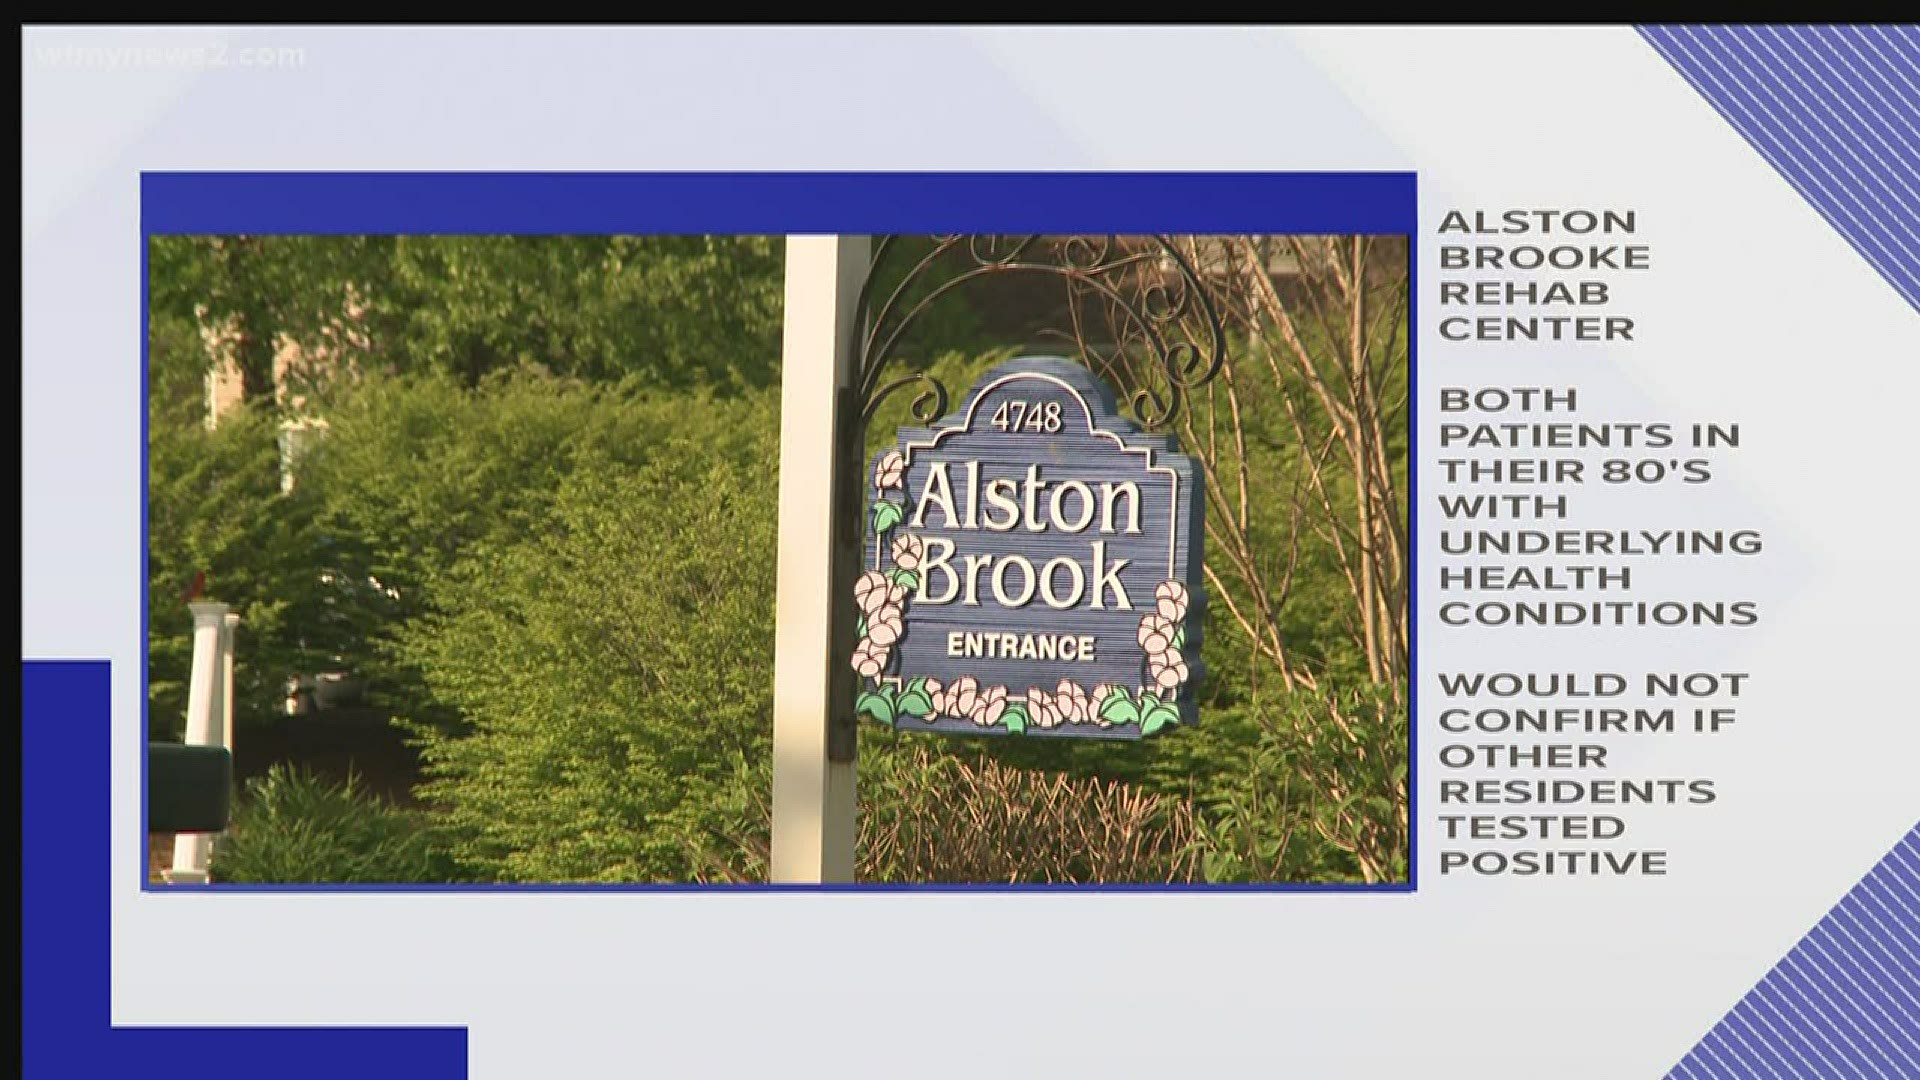 Alston Brook Rehab Center says the two patients were in their eighties and had underlying medical conditions.